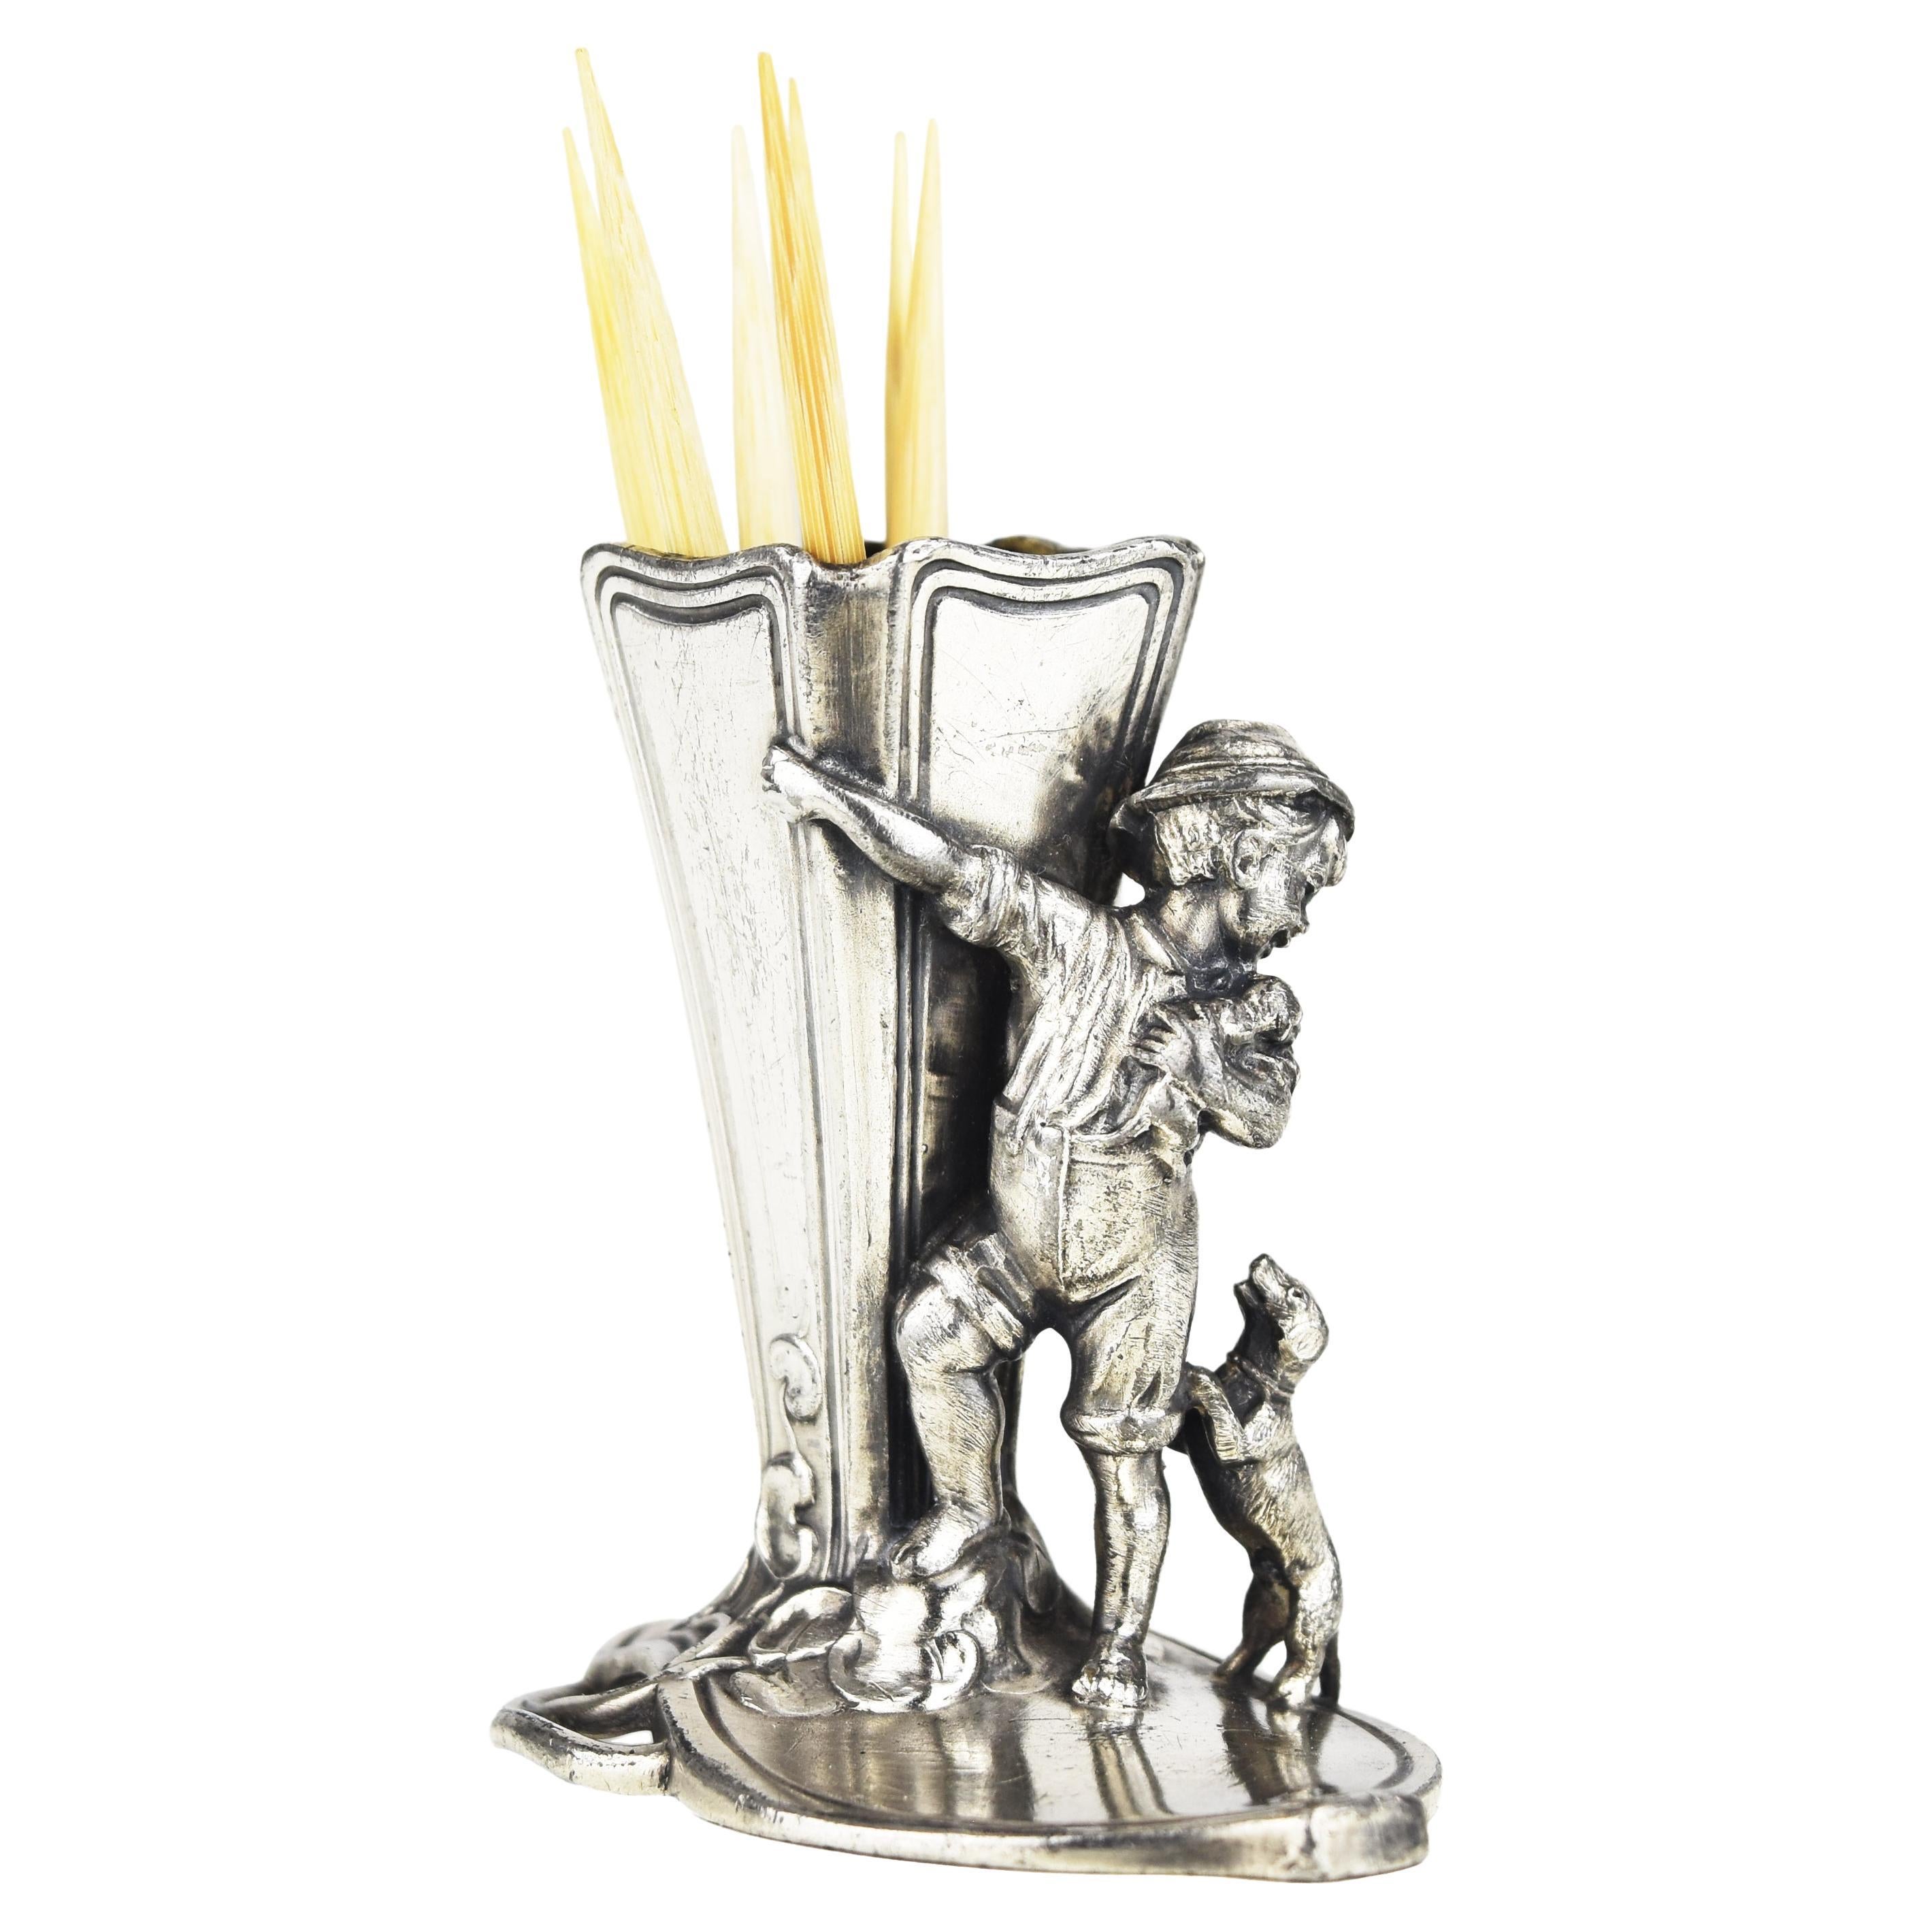 Figurative Toothpick Holder Stand WMF Art Nouveau Antique Silverplated